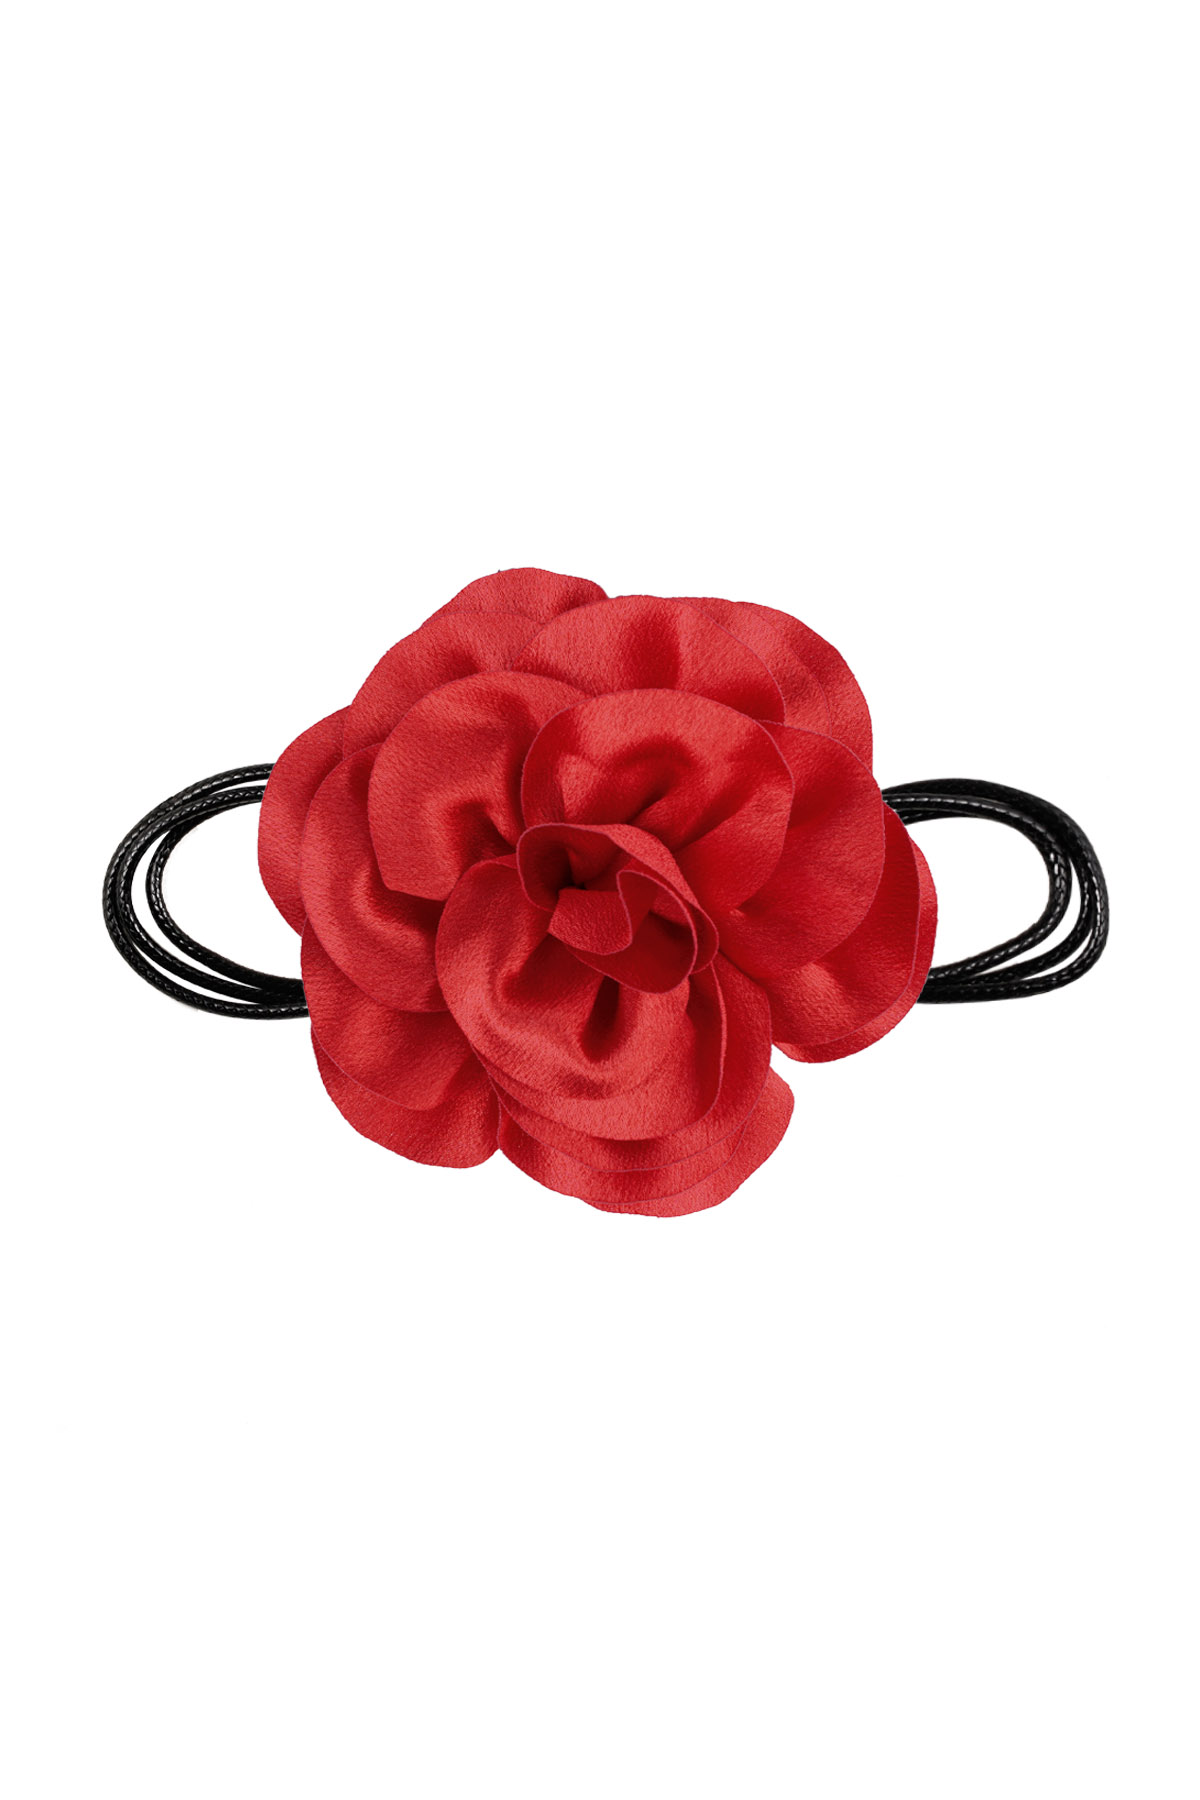 Necklace rope shiny flower - red